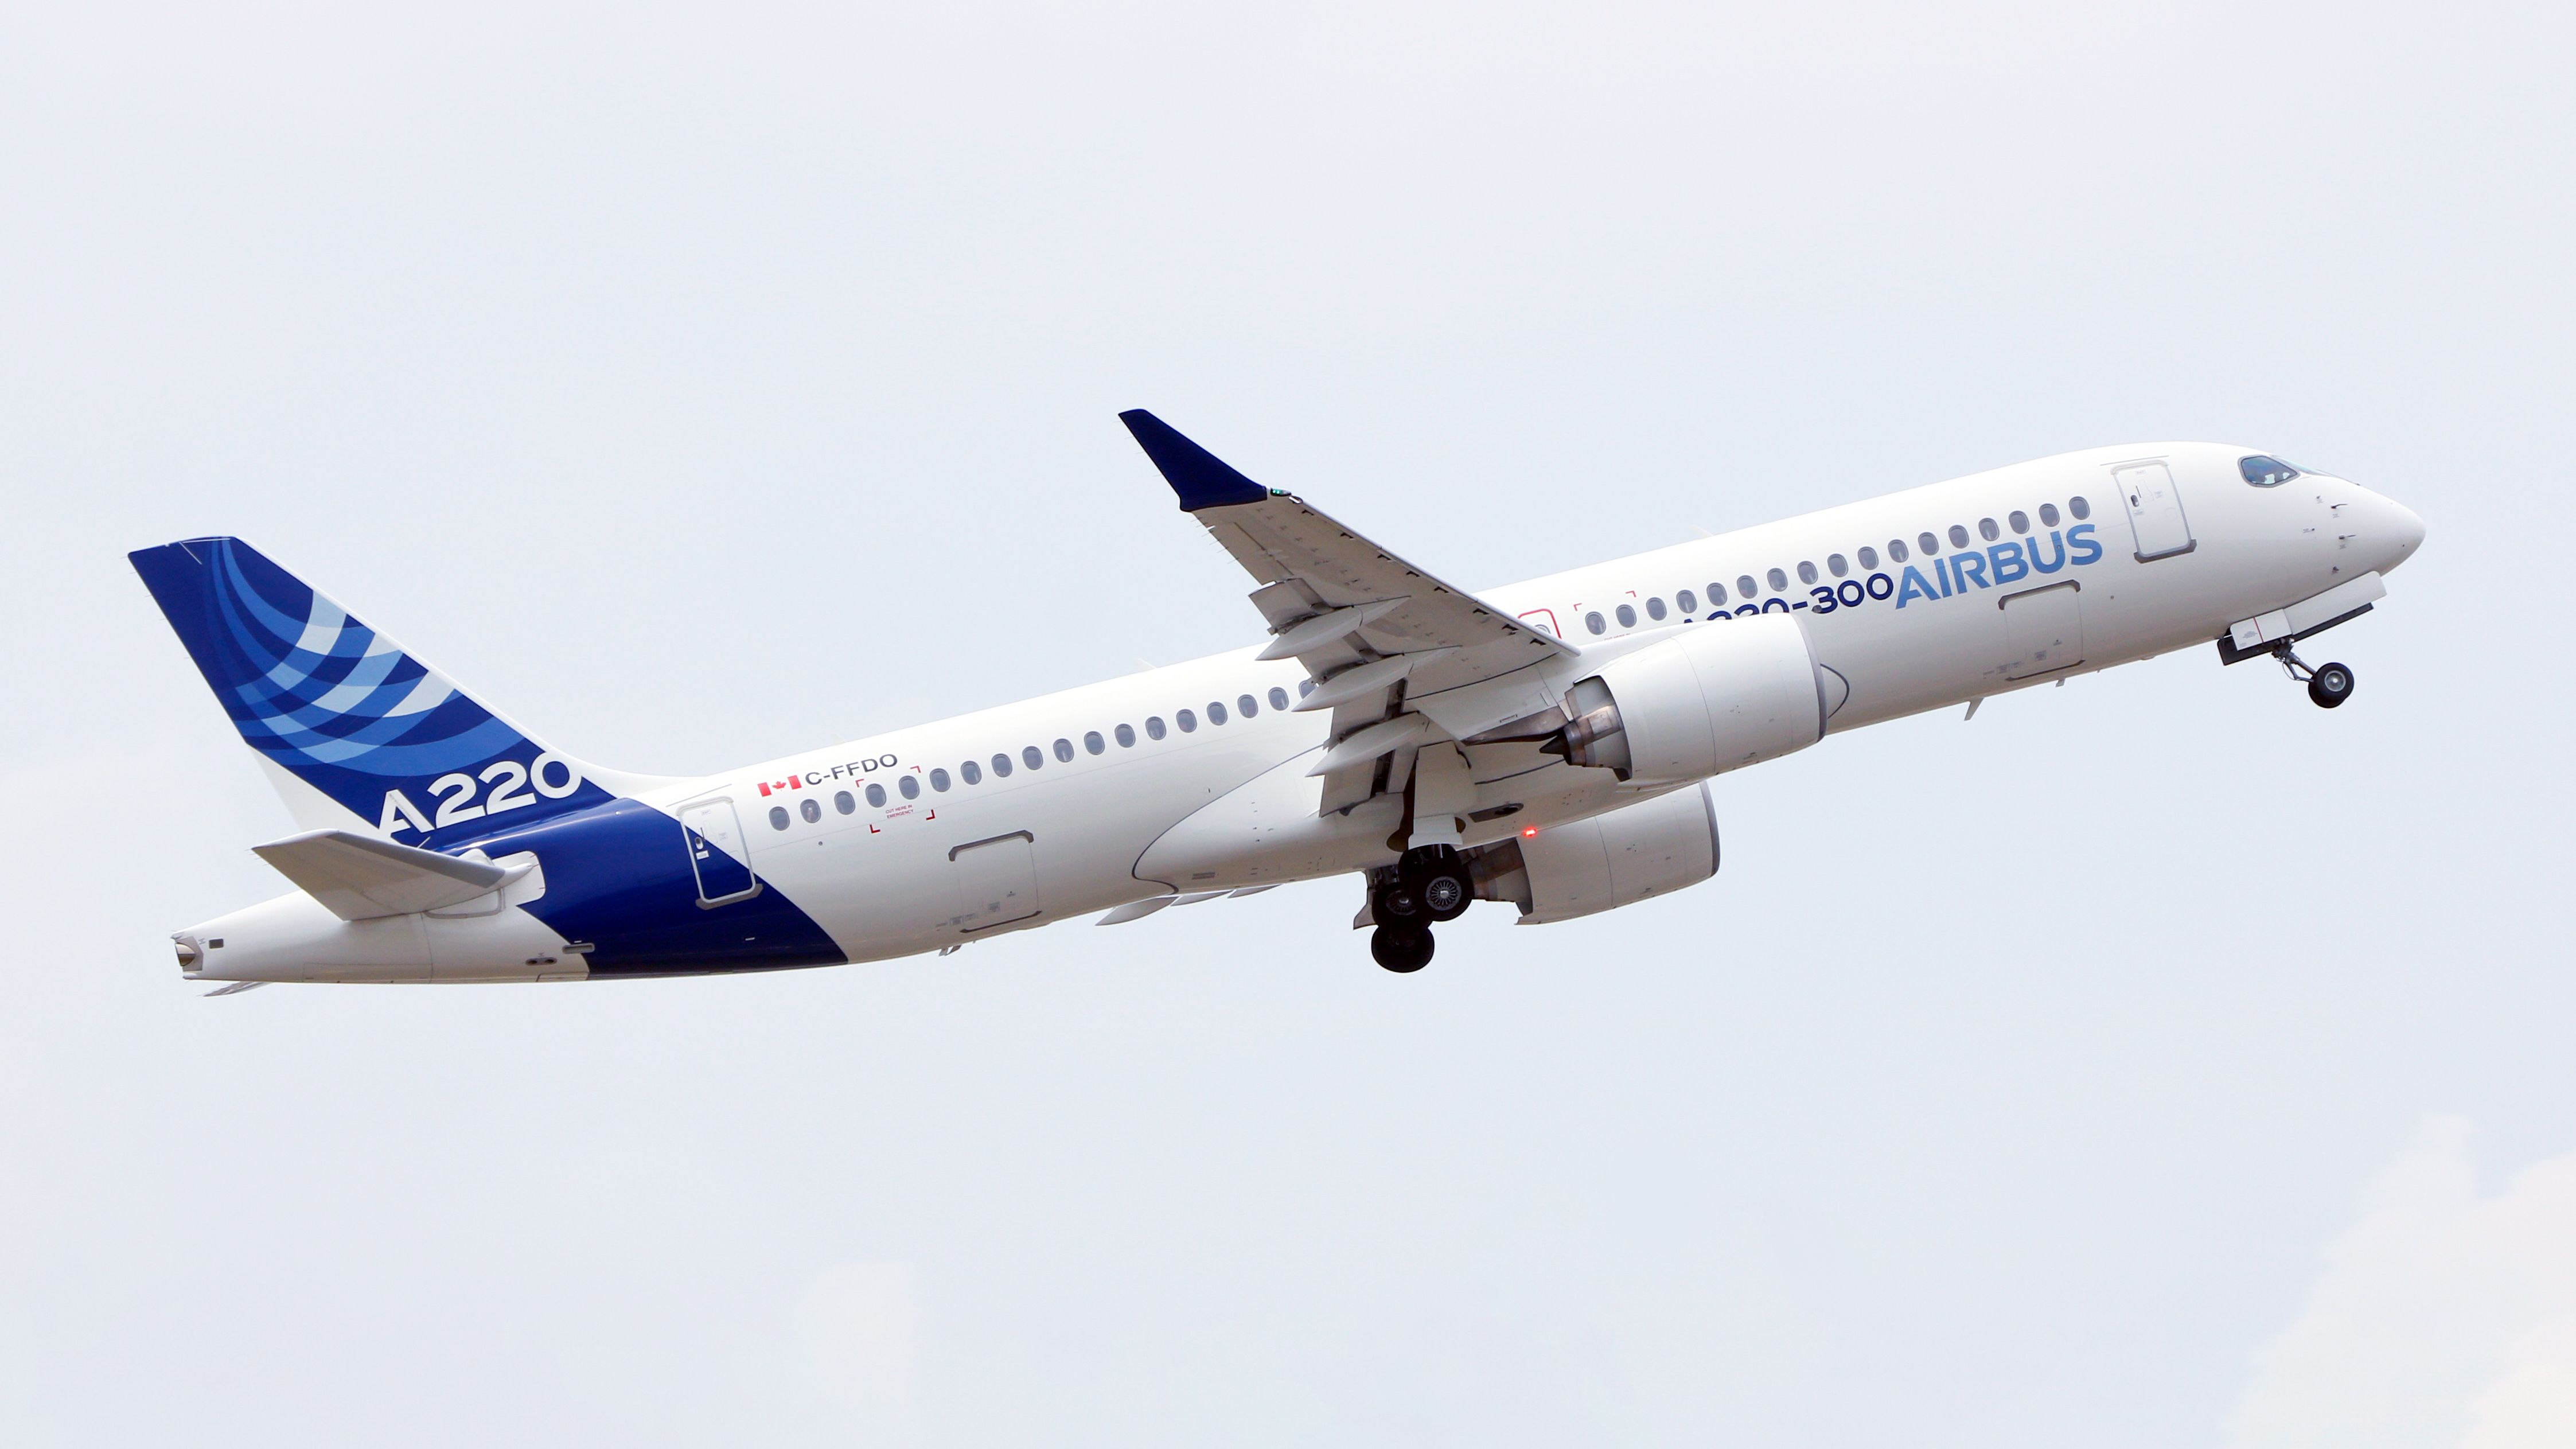 Airbus A220-300 with its test livery departing on a demo flight shutterstock_1825627673-1